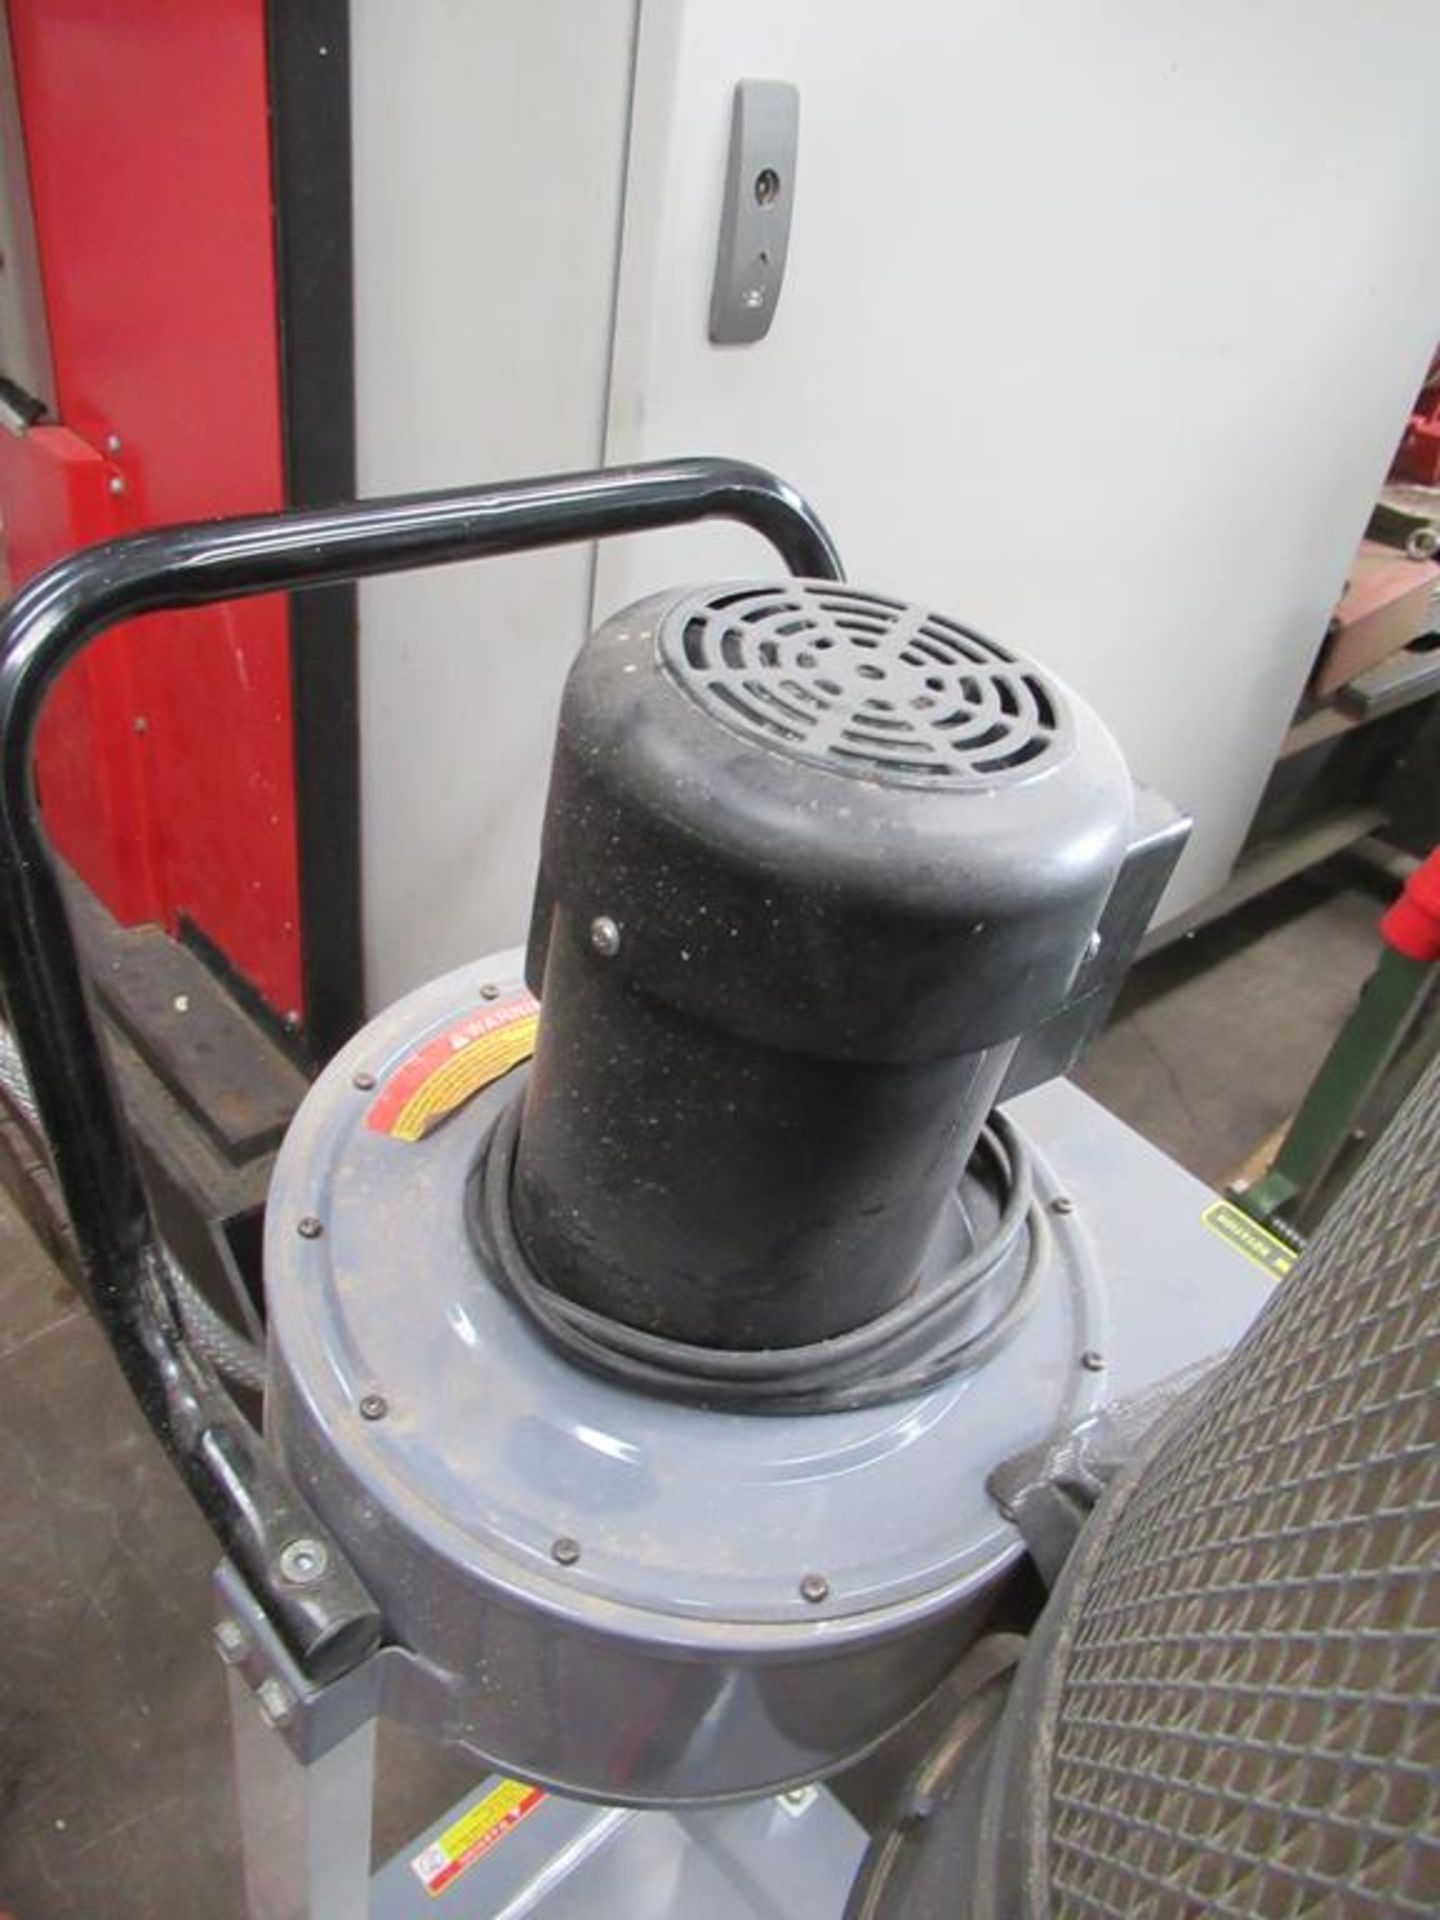 Axminster Trade CT-90H Dust Extractor, 230V, Signle Phase, 50Hz - Image 3 of 4